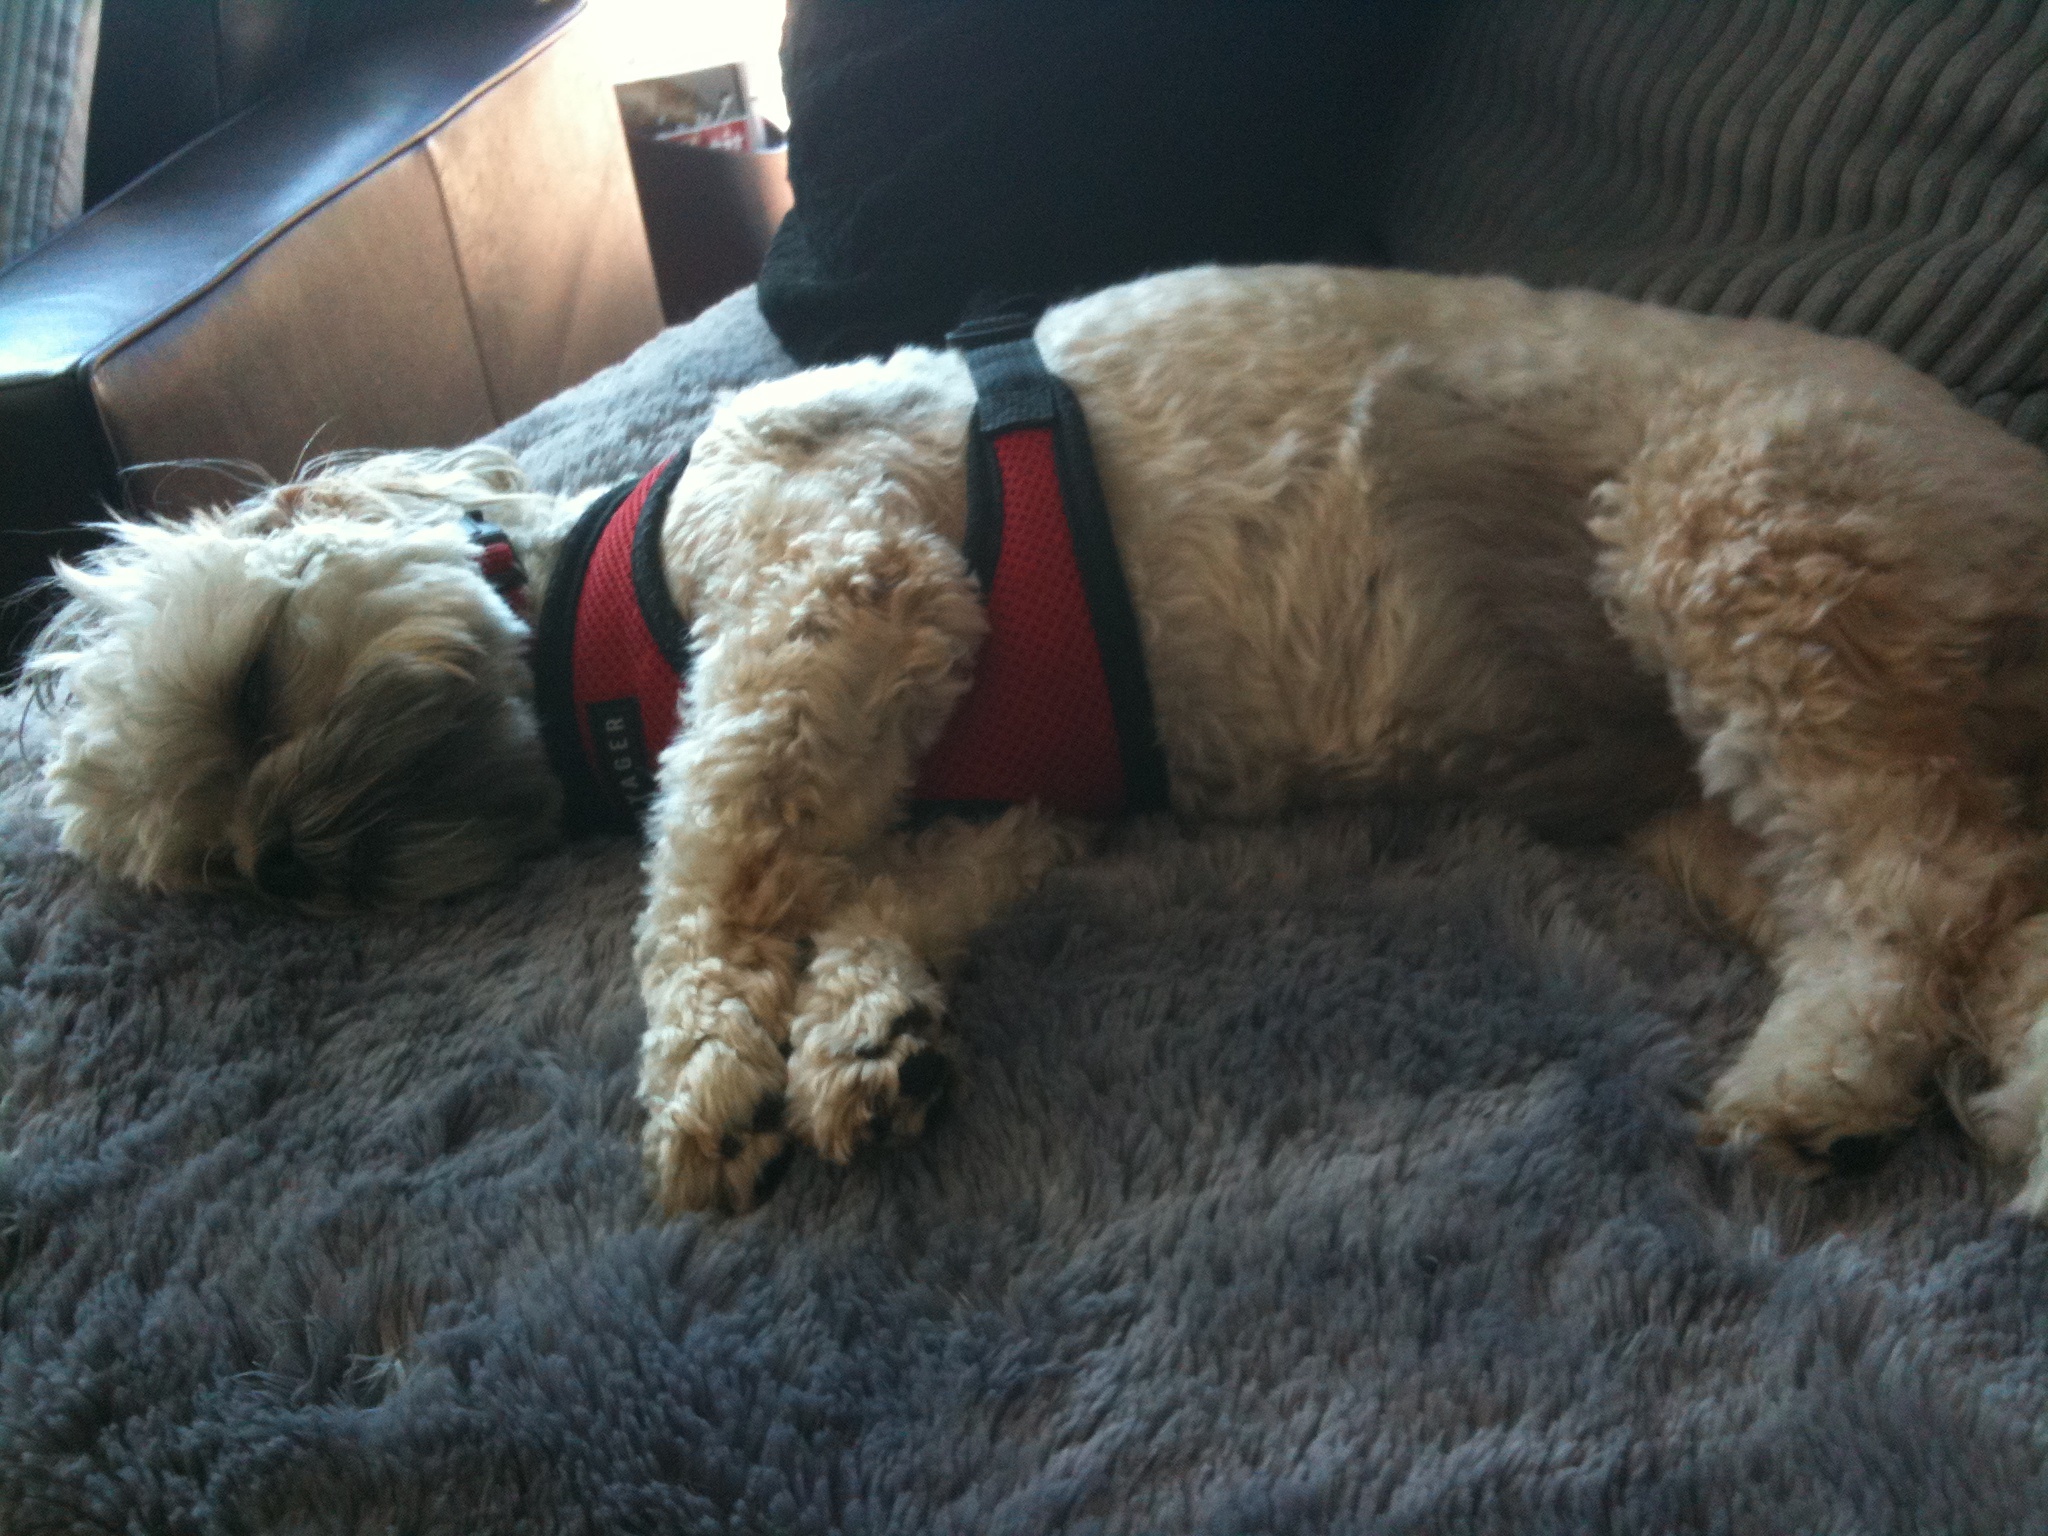 the dog is lying down wearing a vest